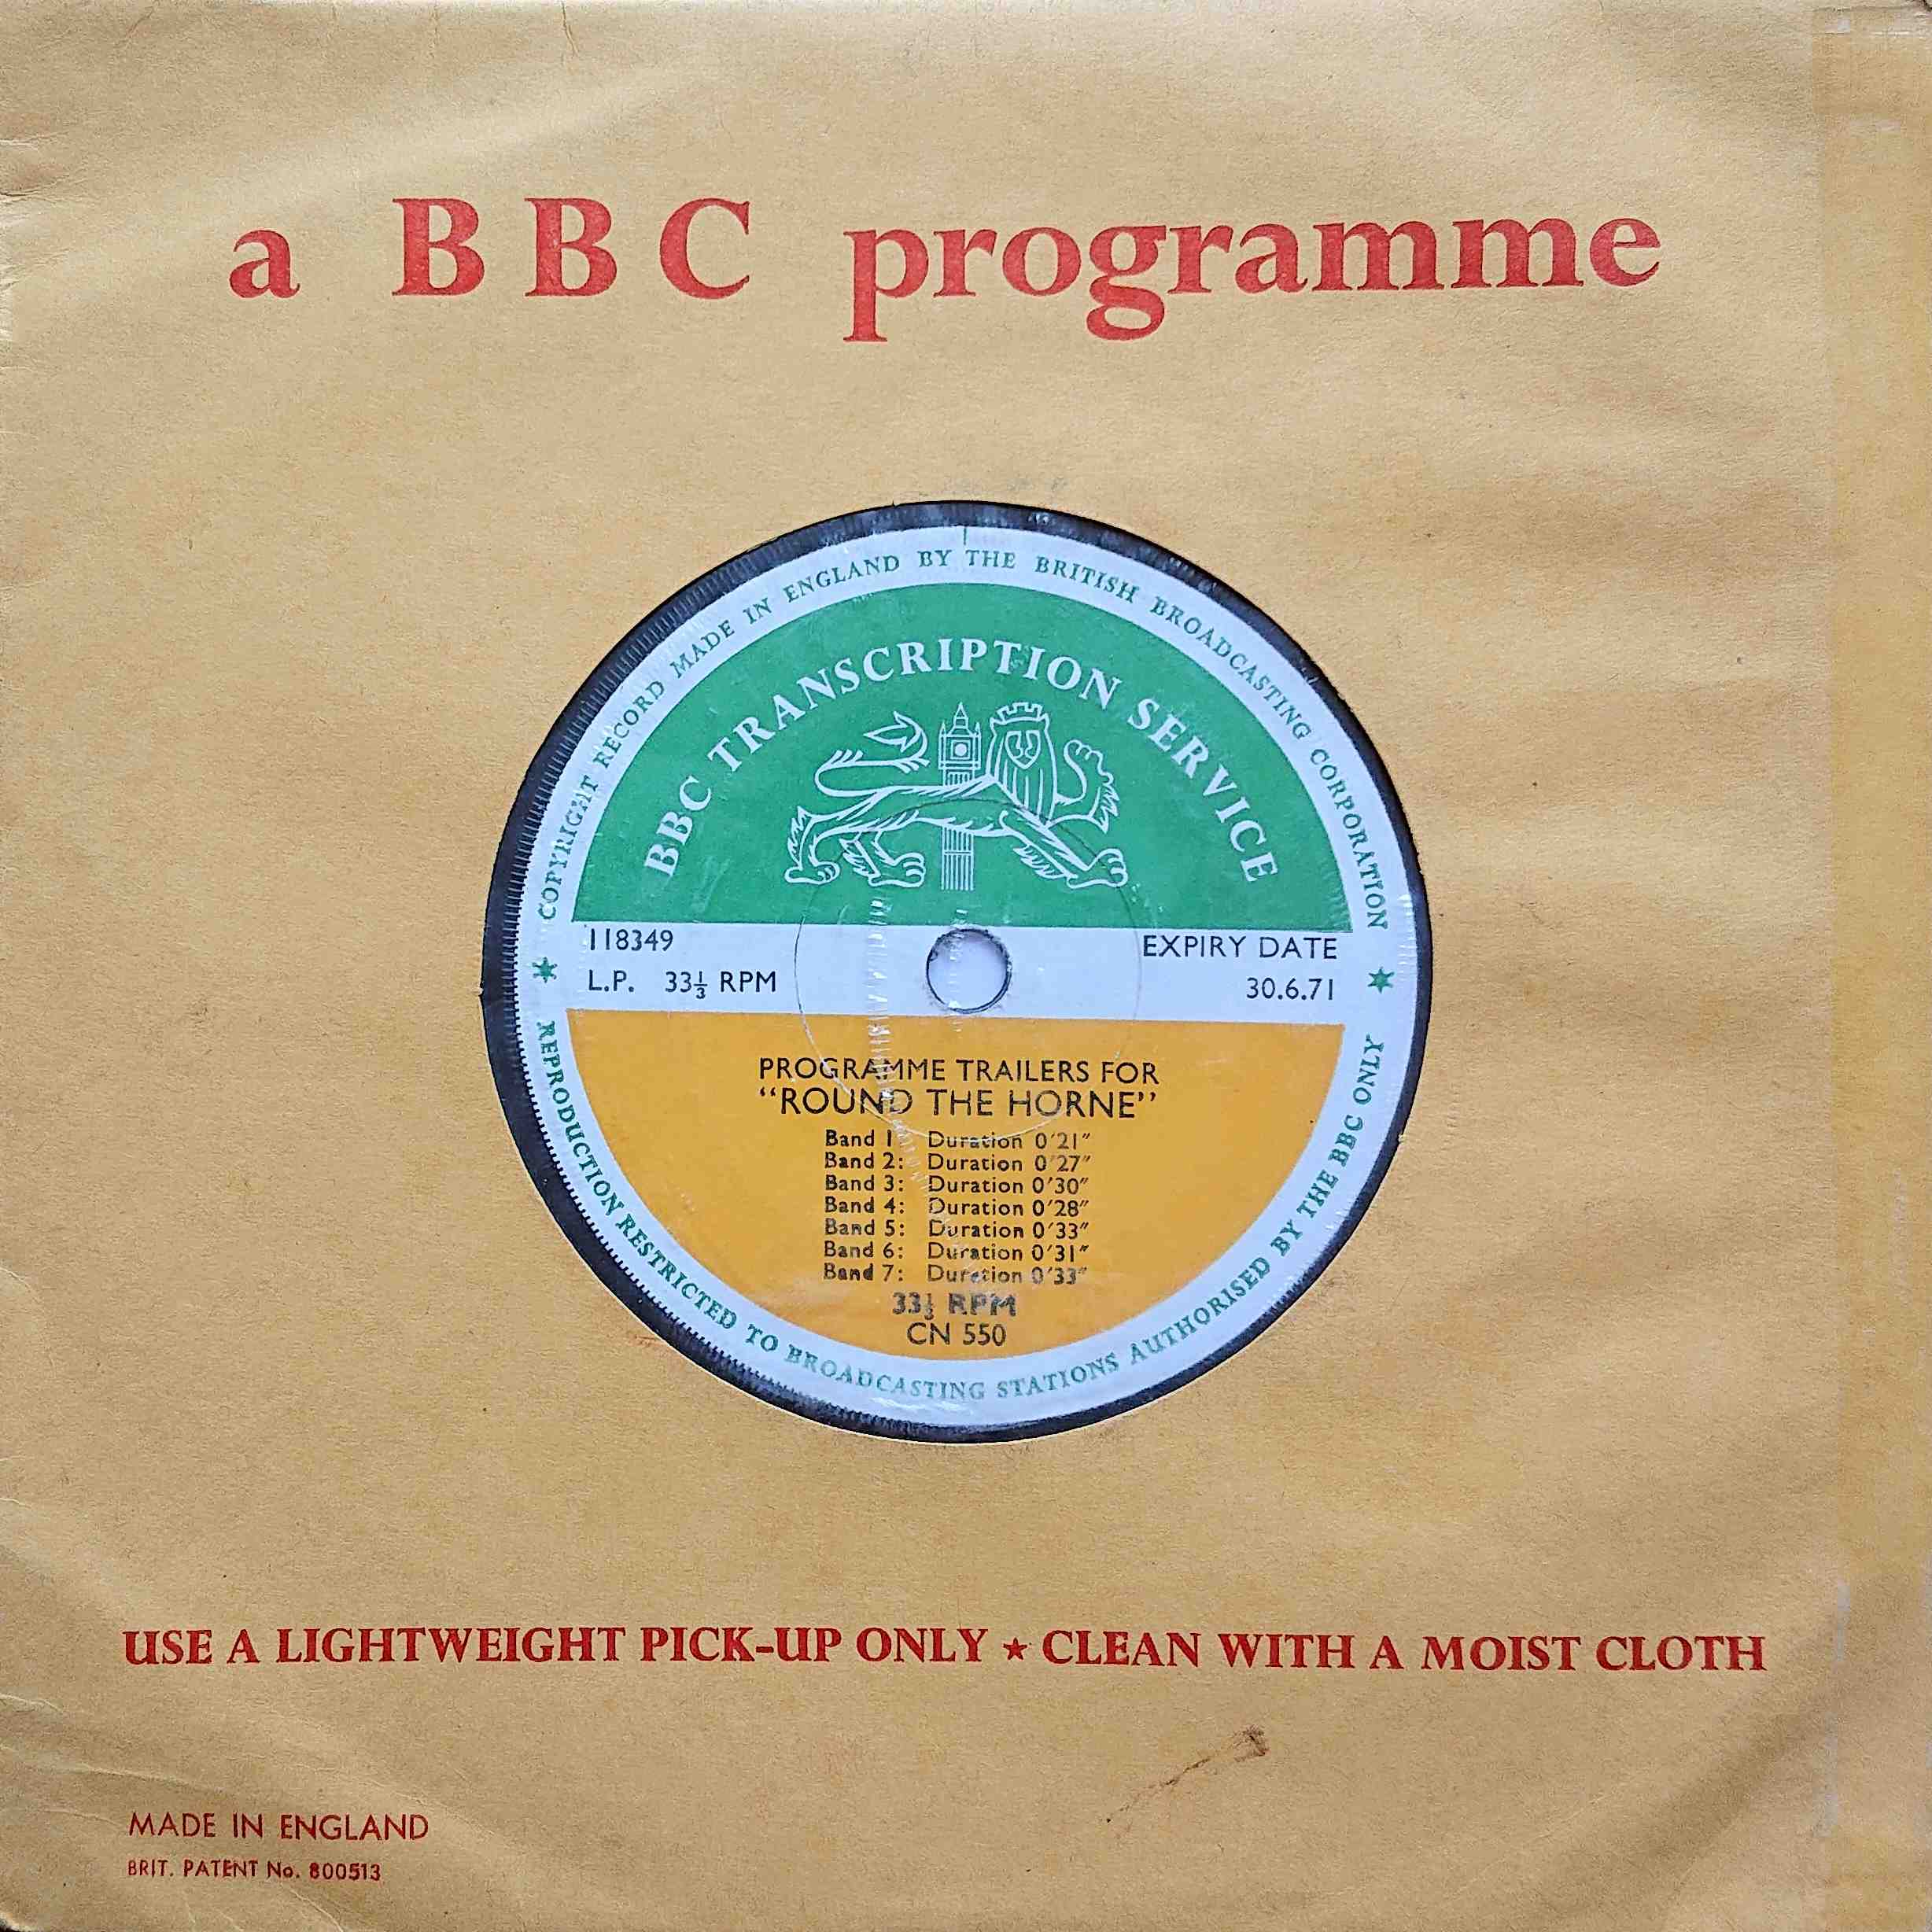 Picture of CN 550 0 Programme trailers for "Round the Horne" by artist Kenneth Horne from the BBC singles - Records and Tapes library